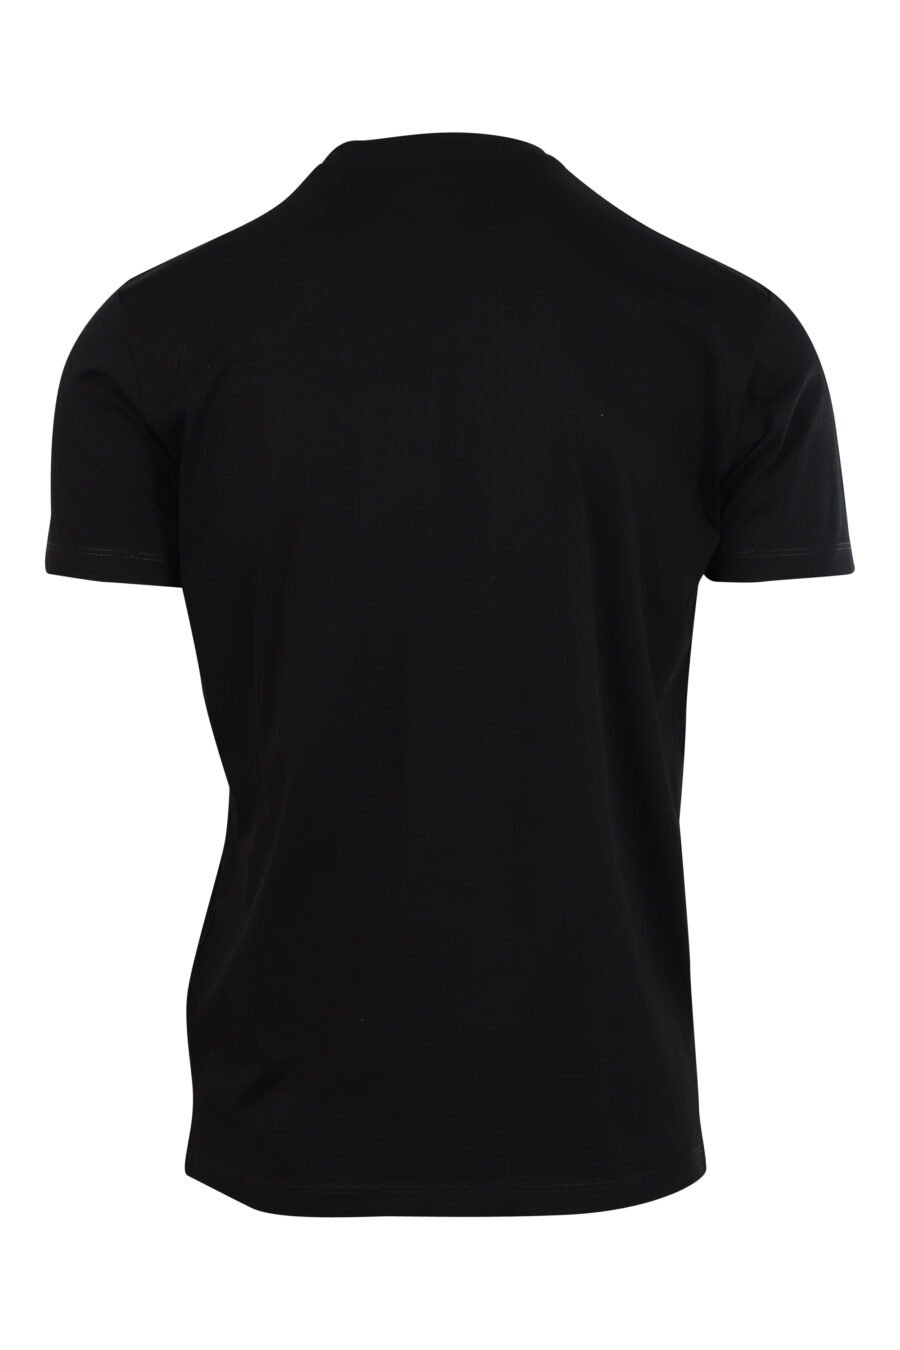 Black T-shirt with maxilogo graphic leaf outline - 8052134941010 2